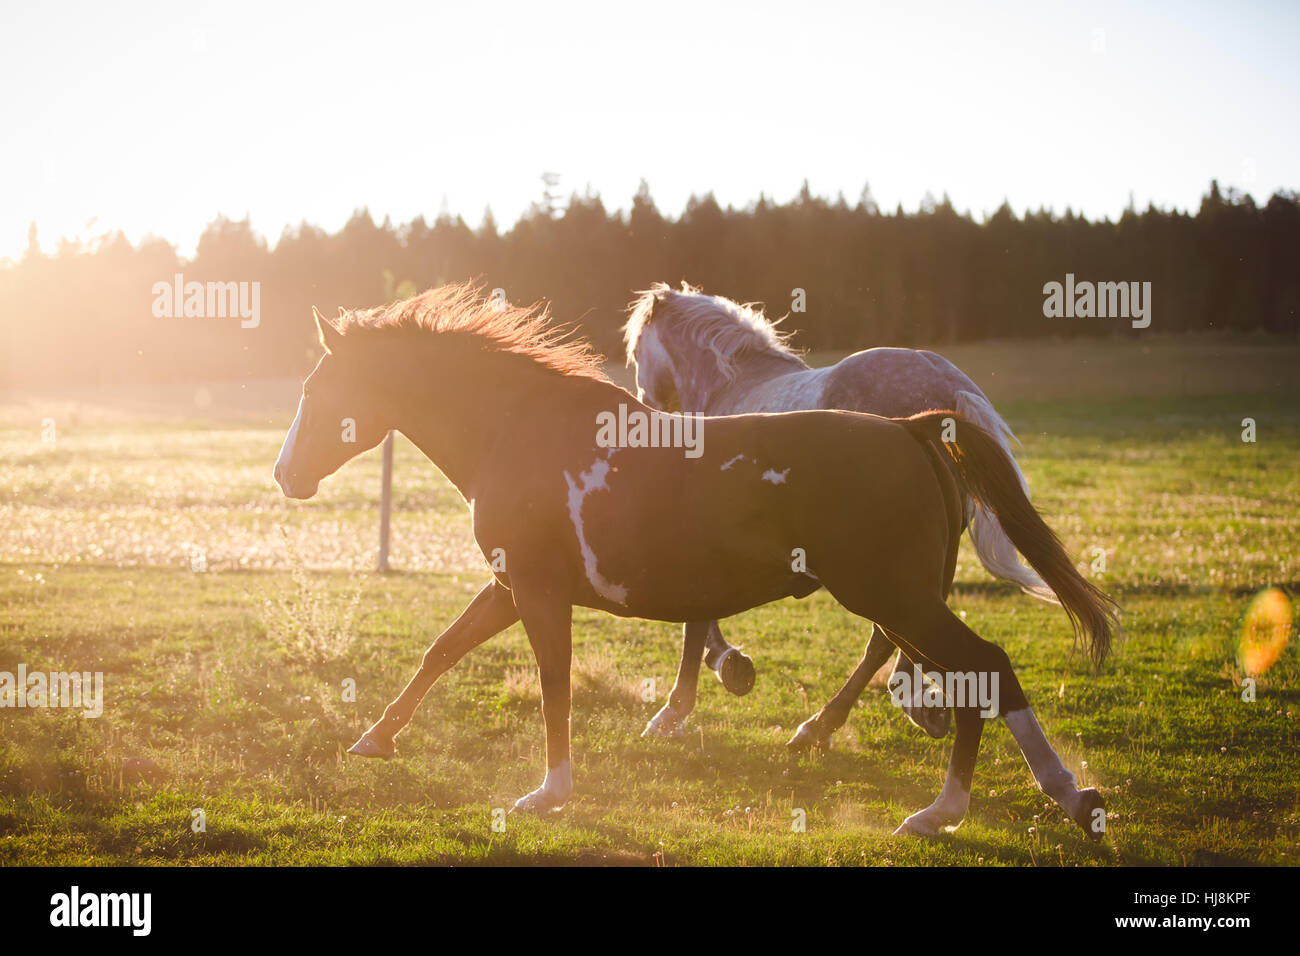 Two horses running in a field, British Columbia, Canada Stock Photo